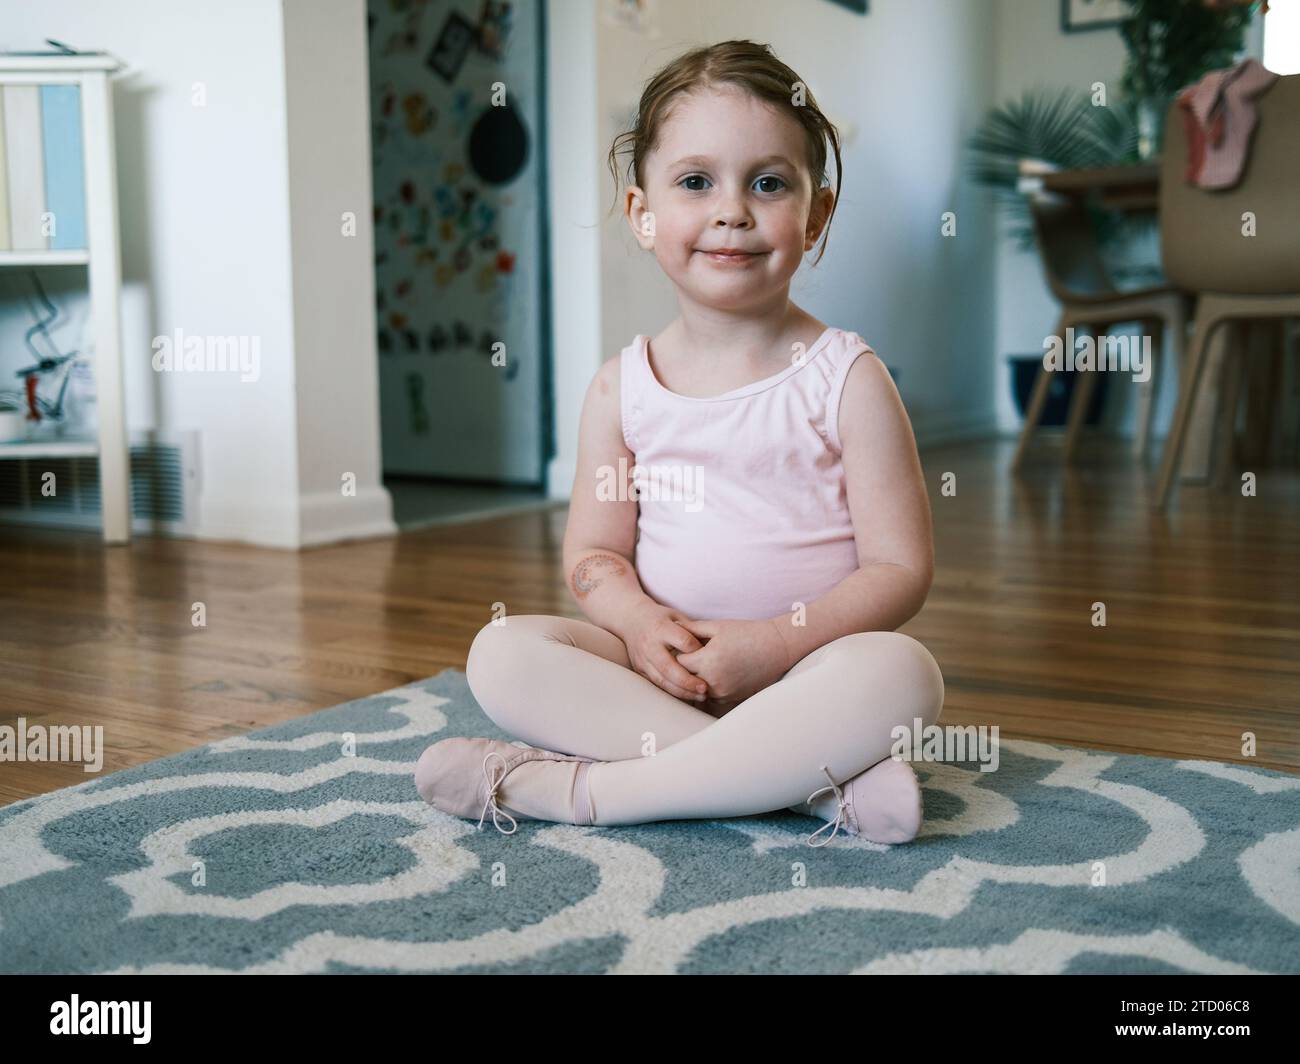 Happy toddler in ballet outfit smiling in living room Stock Photo